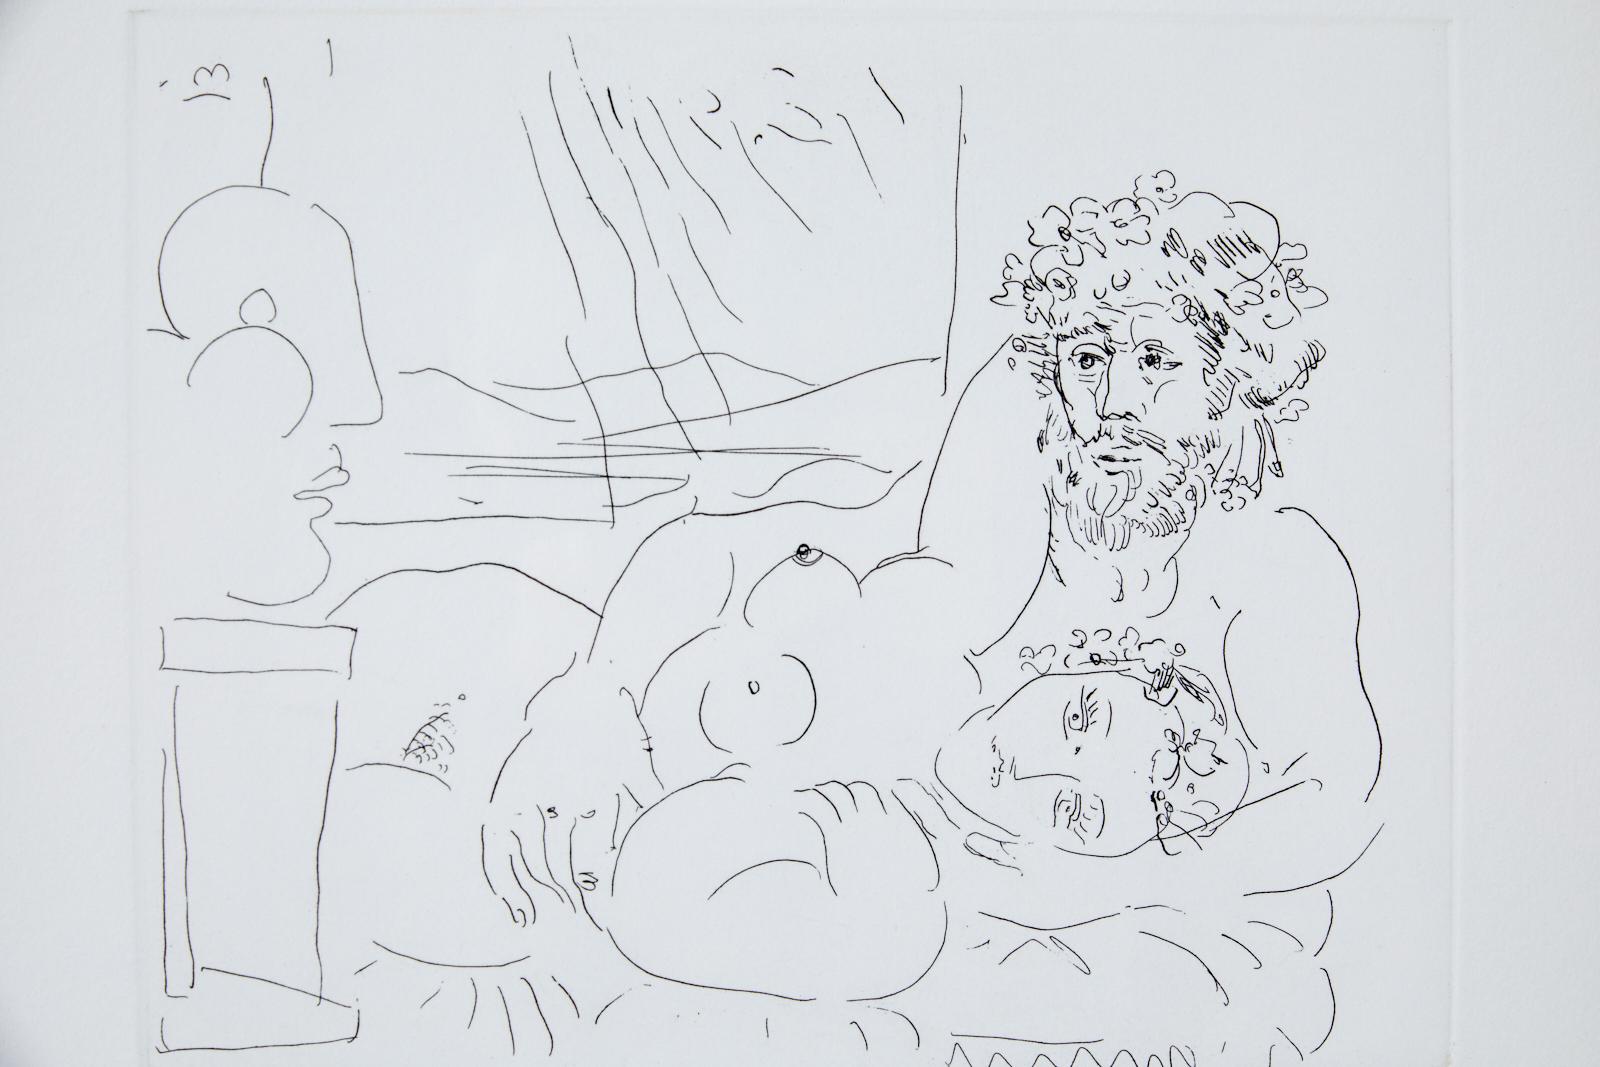 Pair of Etchings V. 3. IX and XII  - Gray Figurative Art by Peter Max